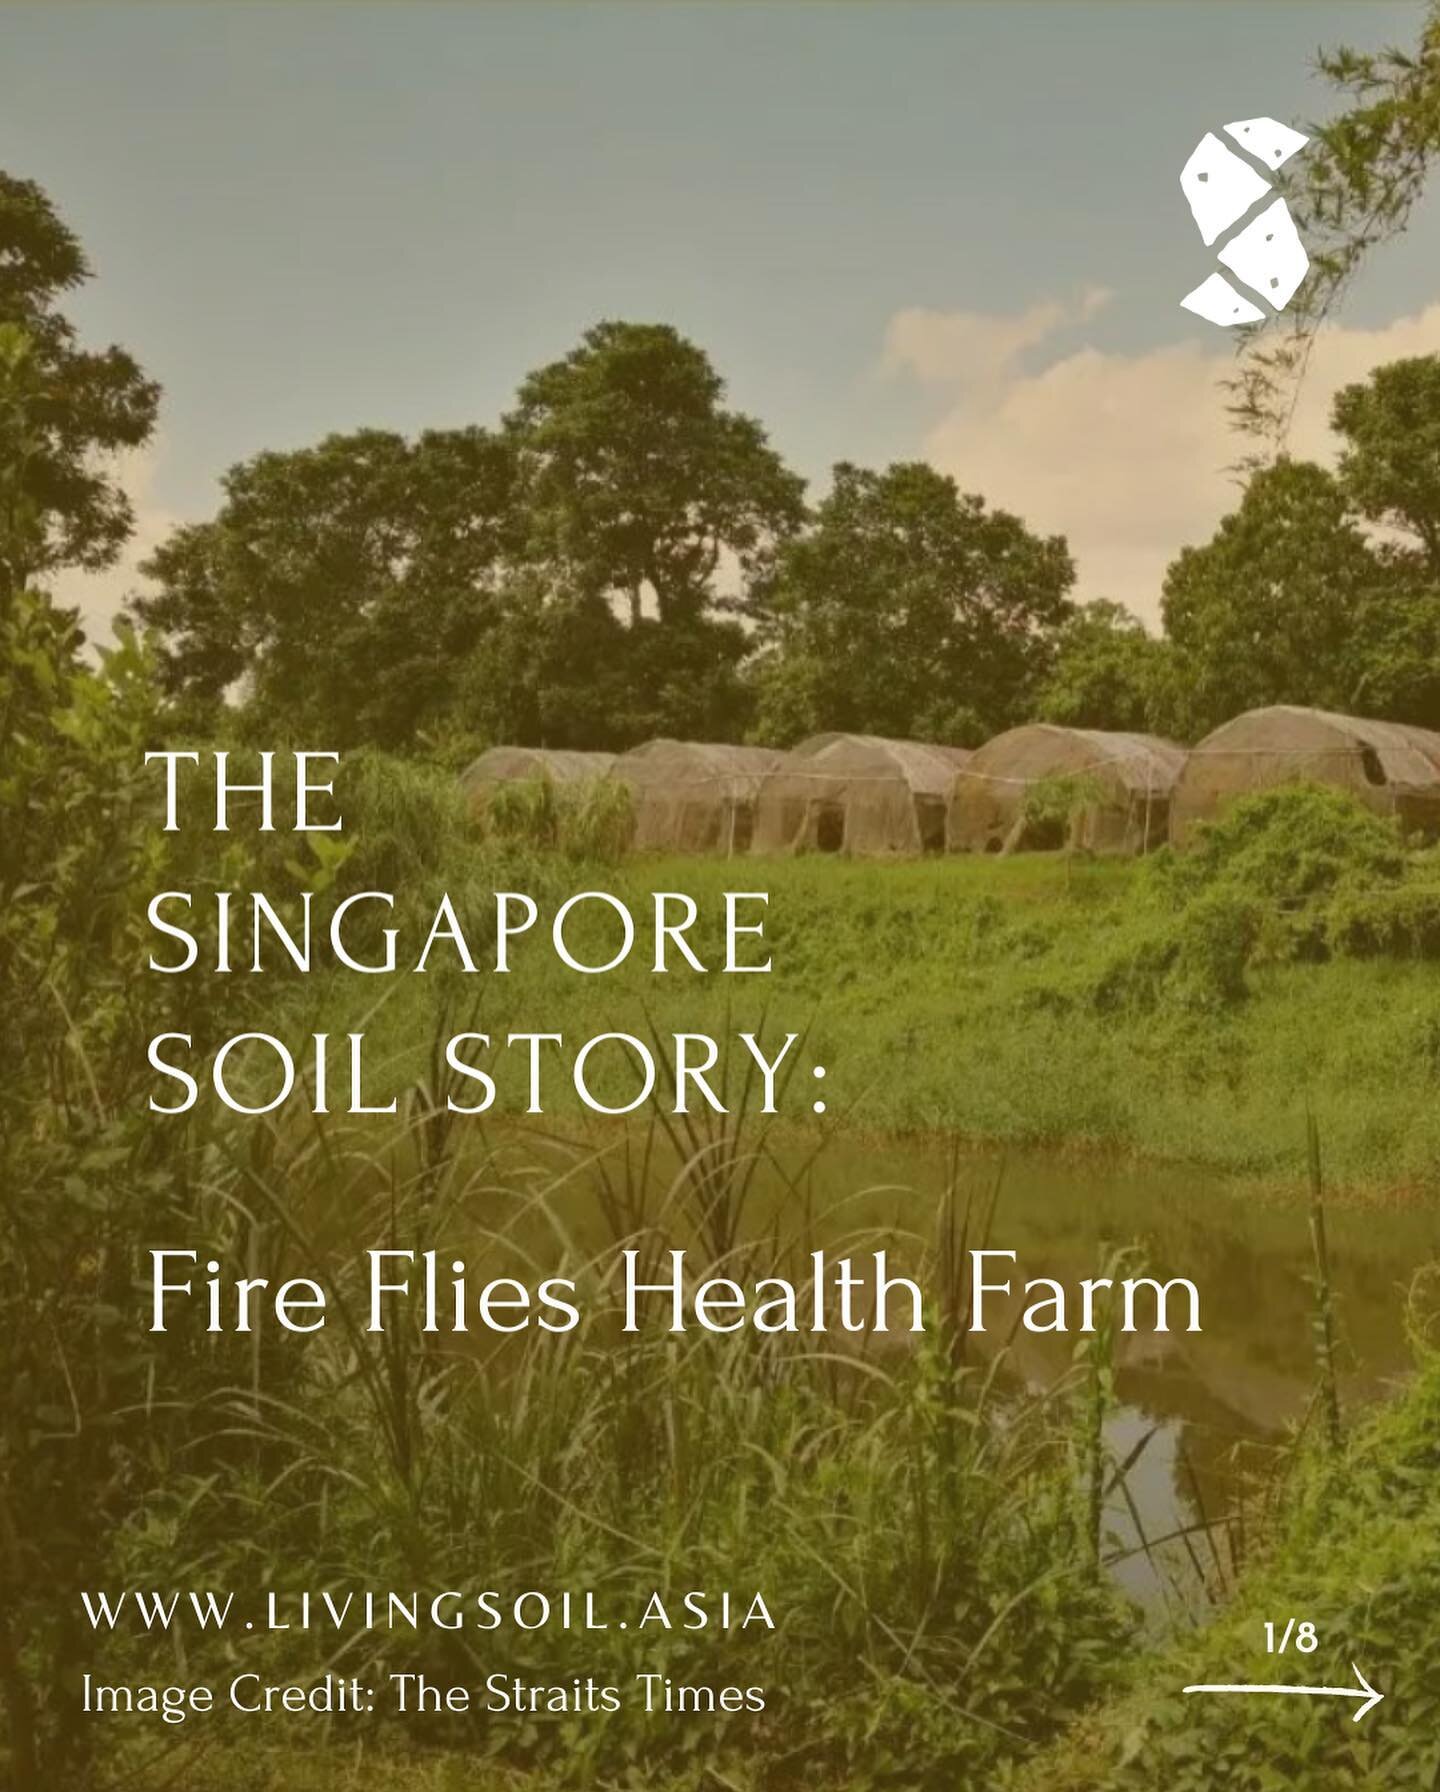 Fire Flies Health Farm was one of the few soil-based farms in Singapore that used organic farming practices of growing their vegetables and herbs for sale, with their produce also going into the making of their popular thunder tea rice! 🌿

Unfortuna